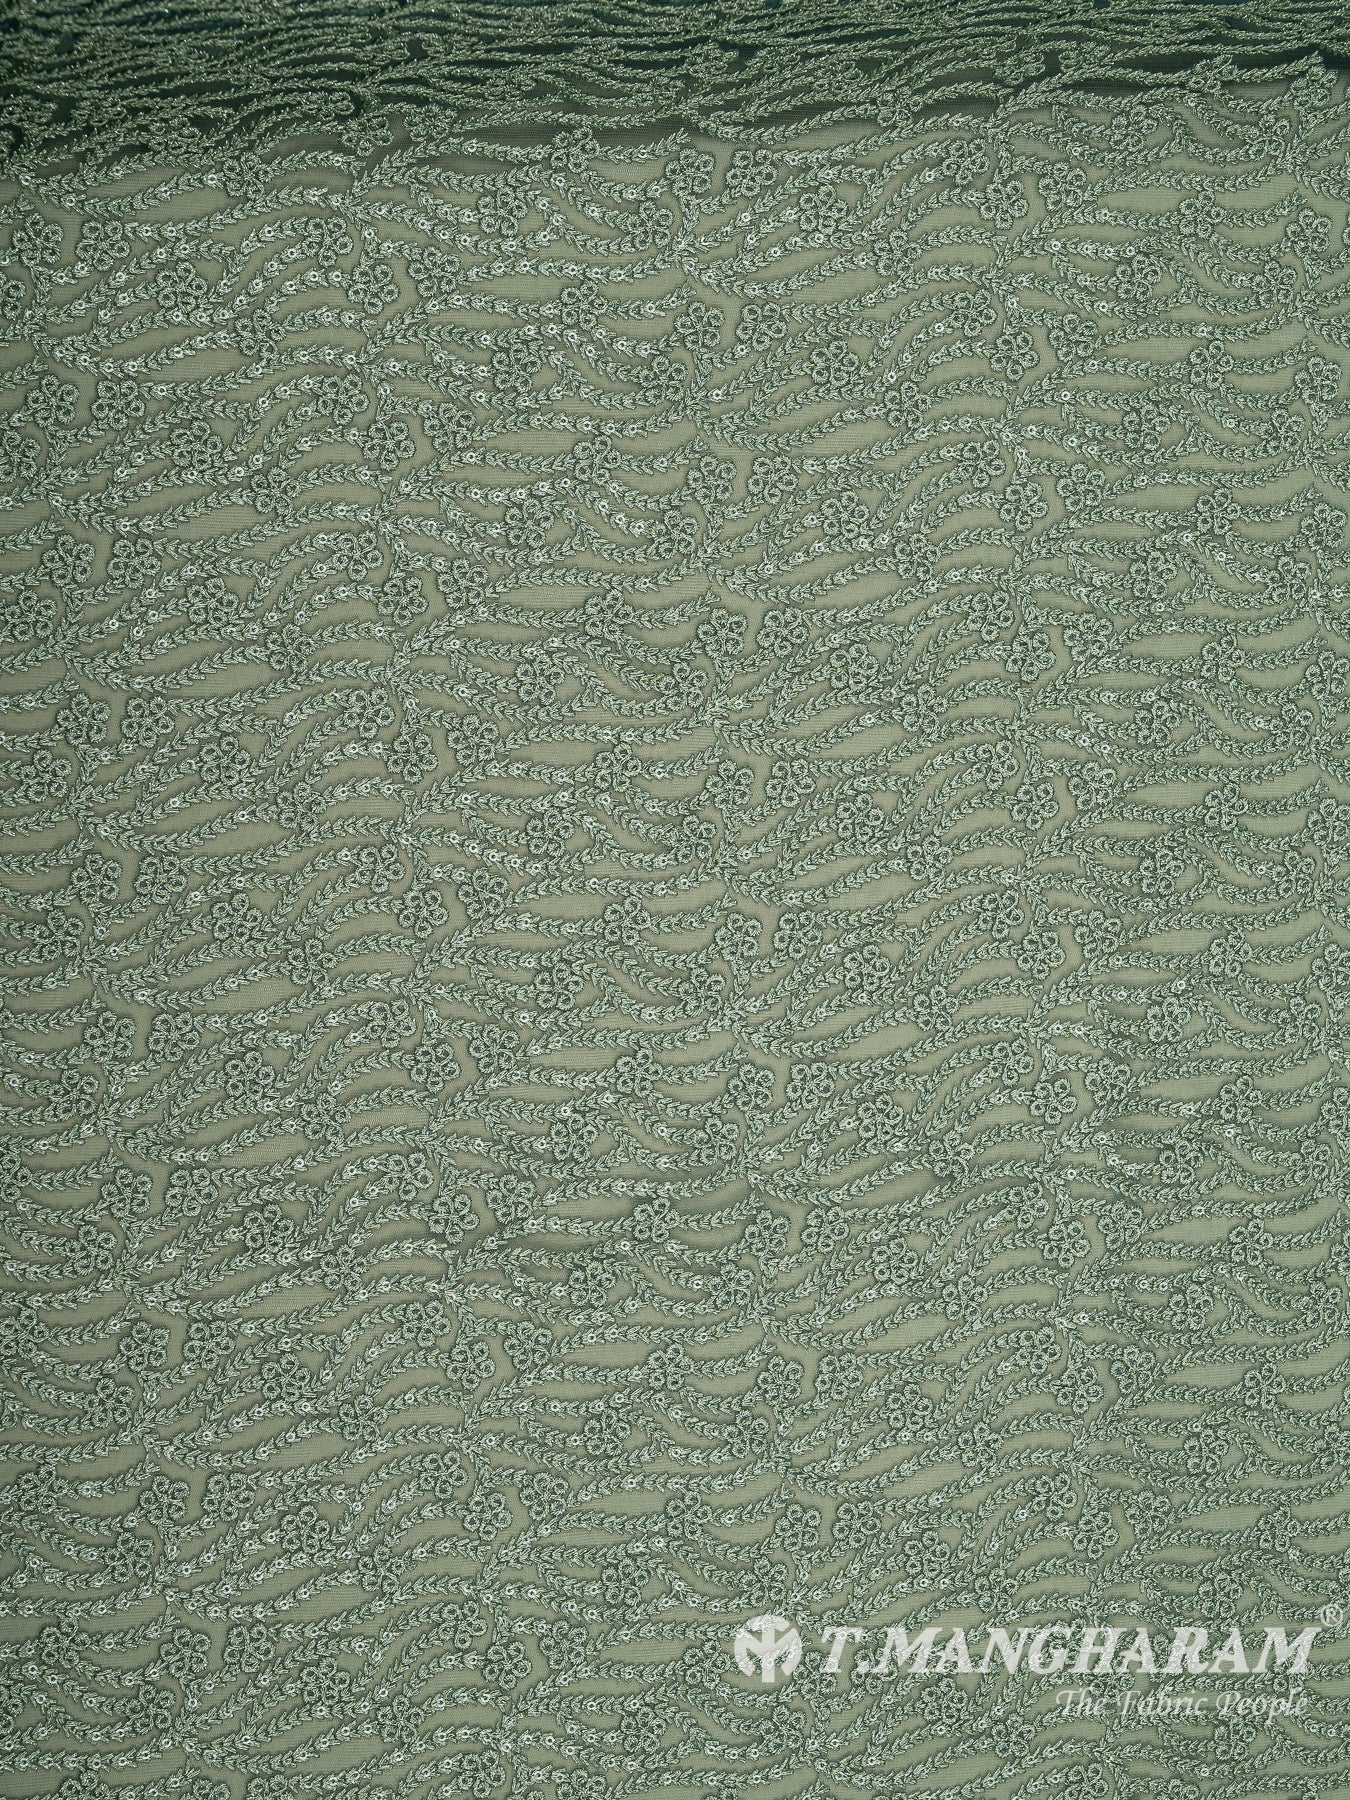 Green Net Embroidery Fabric - EC8434 view-3